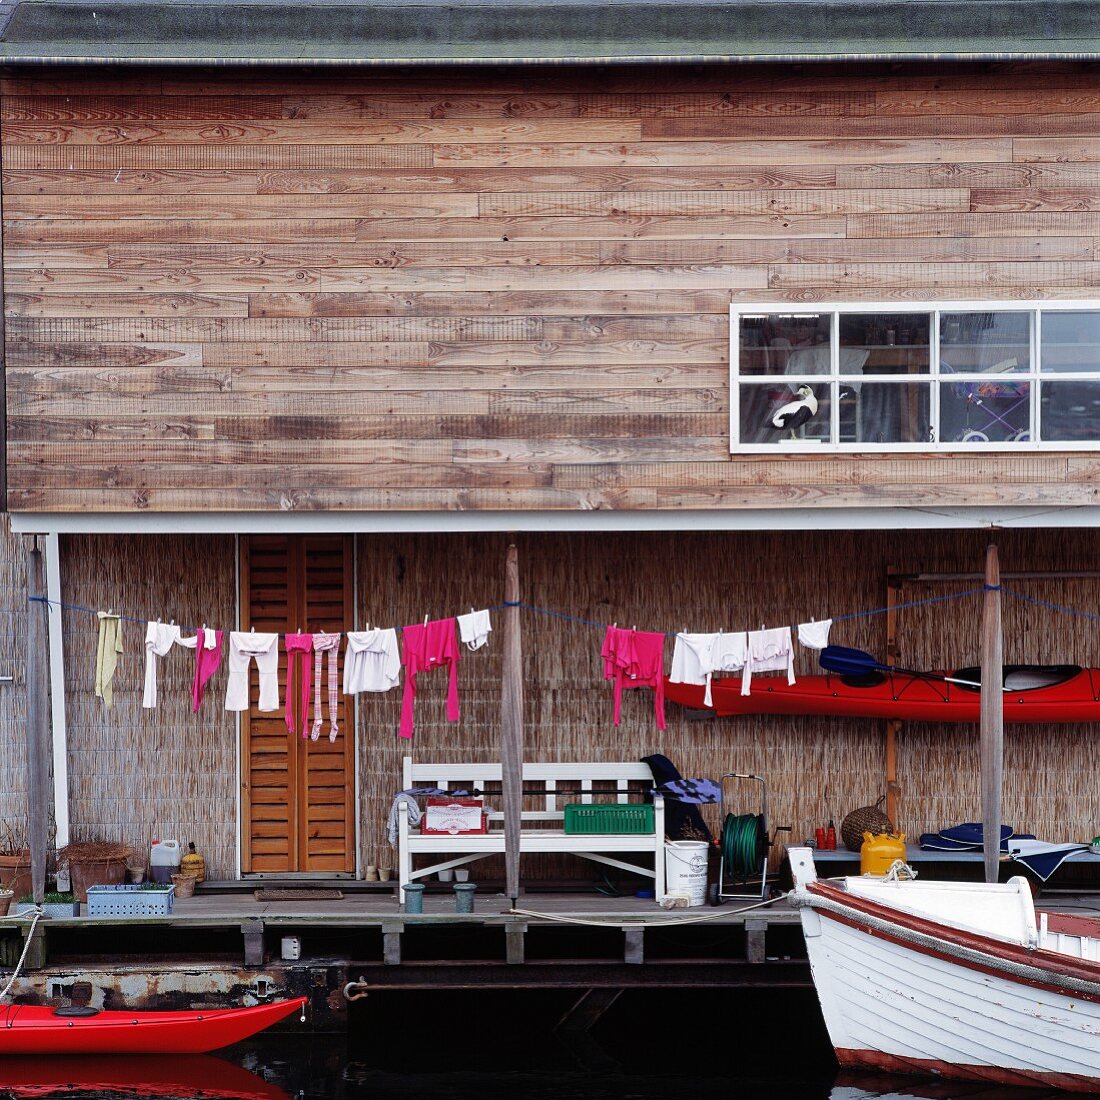 Wooden house with laundry hanging to dry and moored boats on lake shore